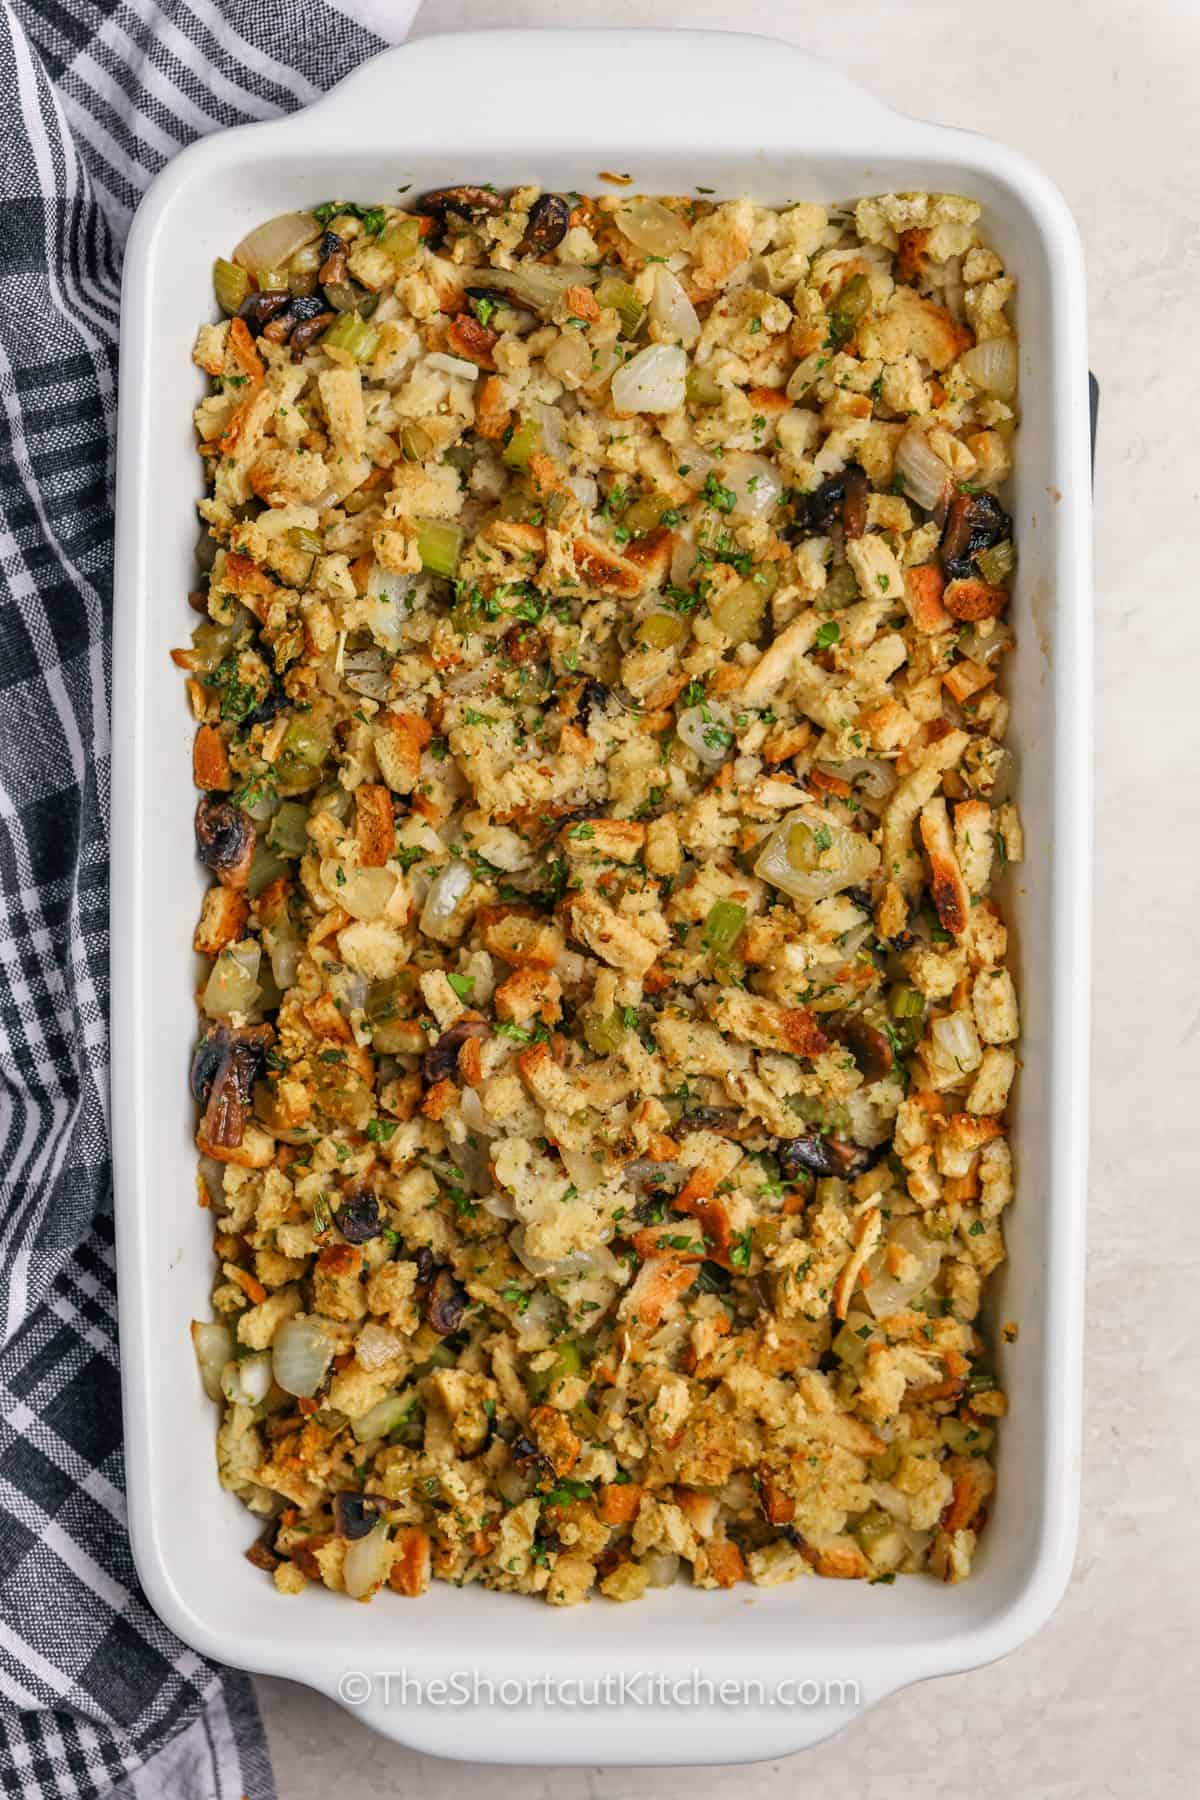 cooked Shortcut Stuffing from a Box in the casserole dish